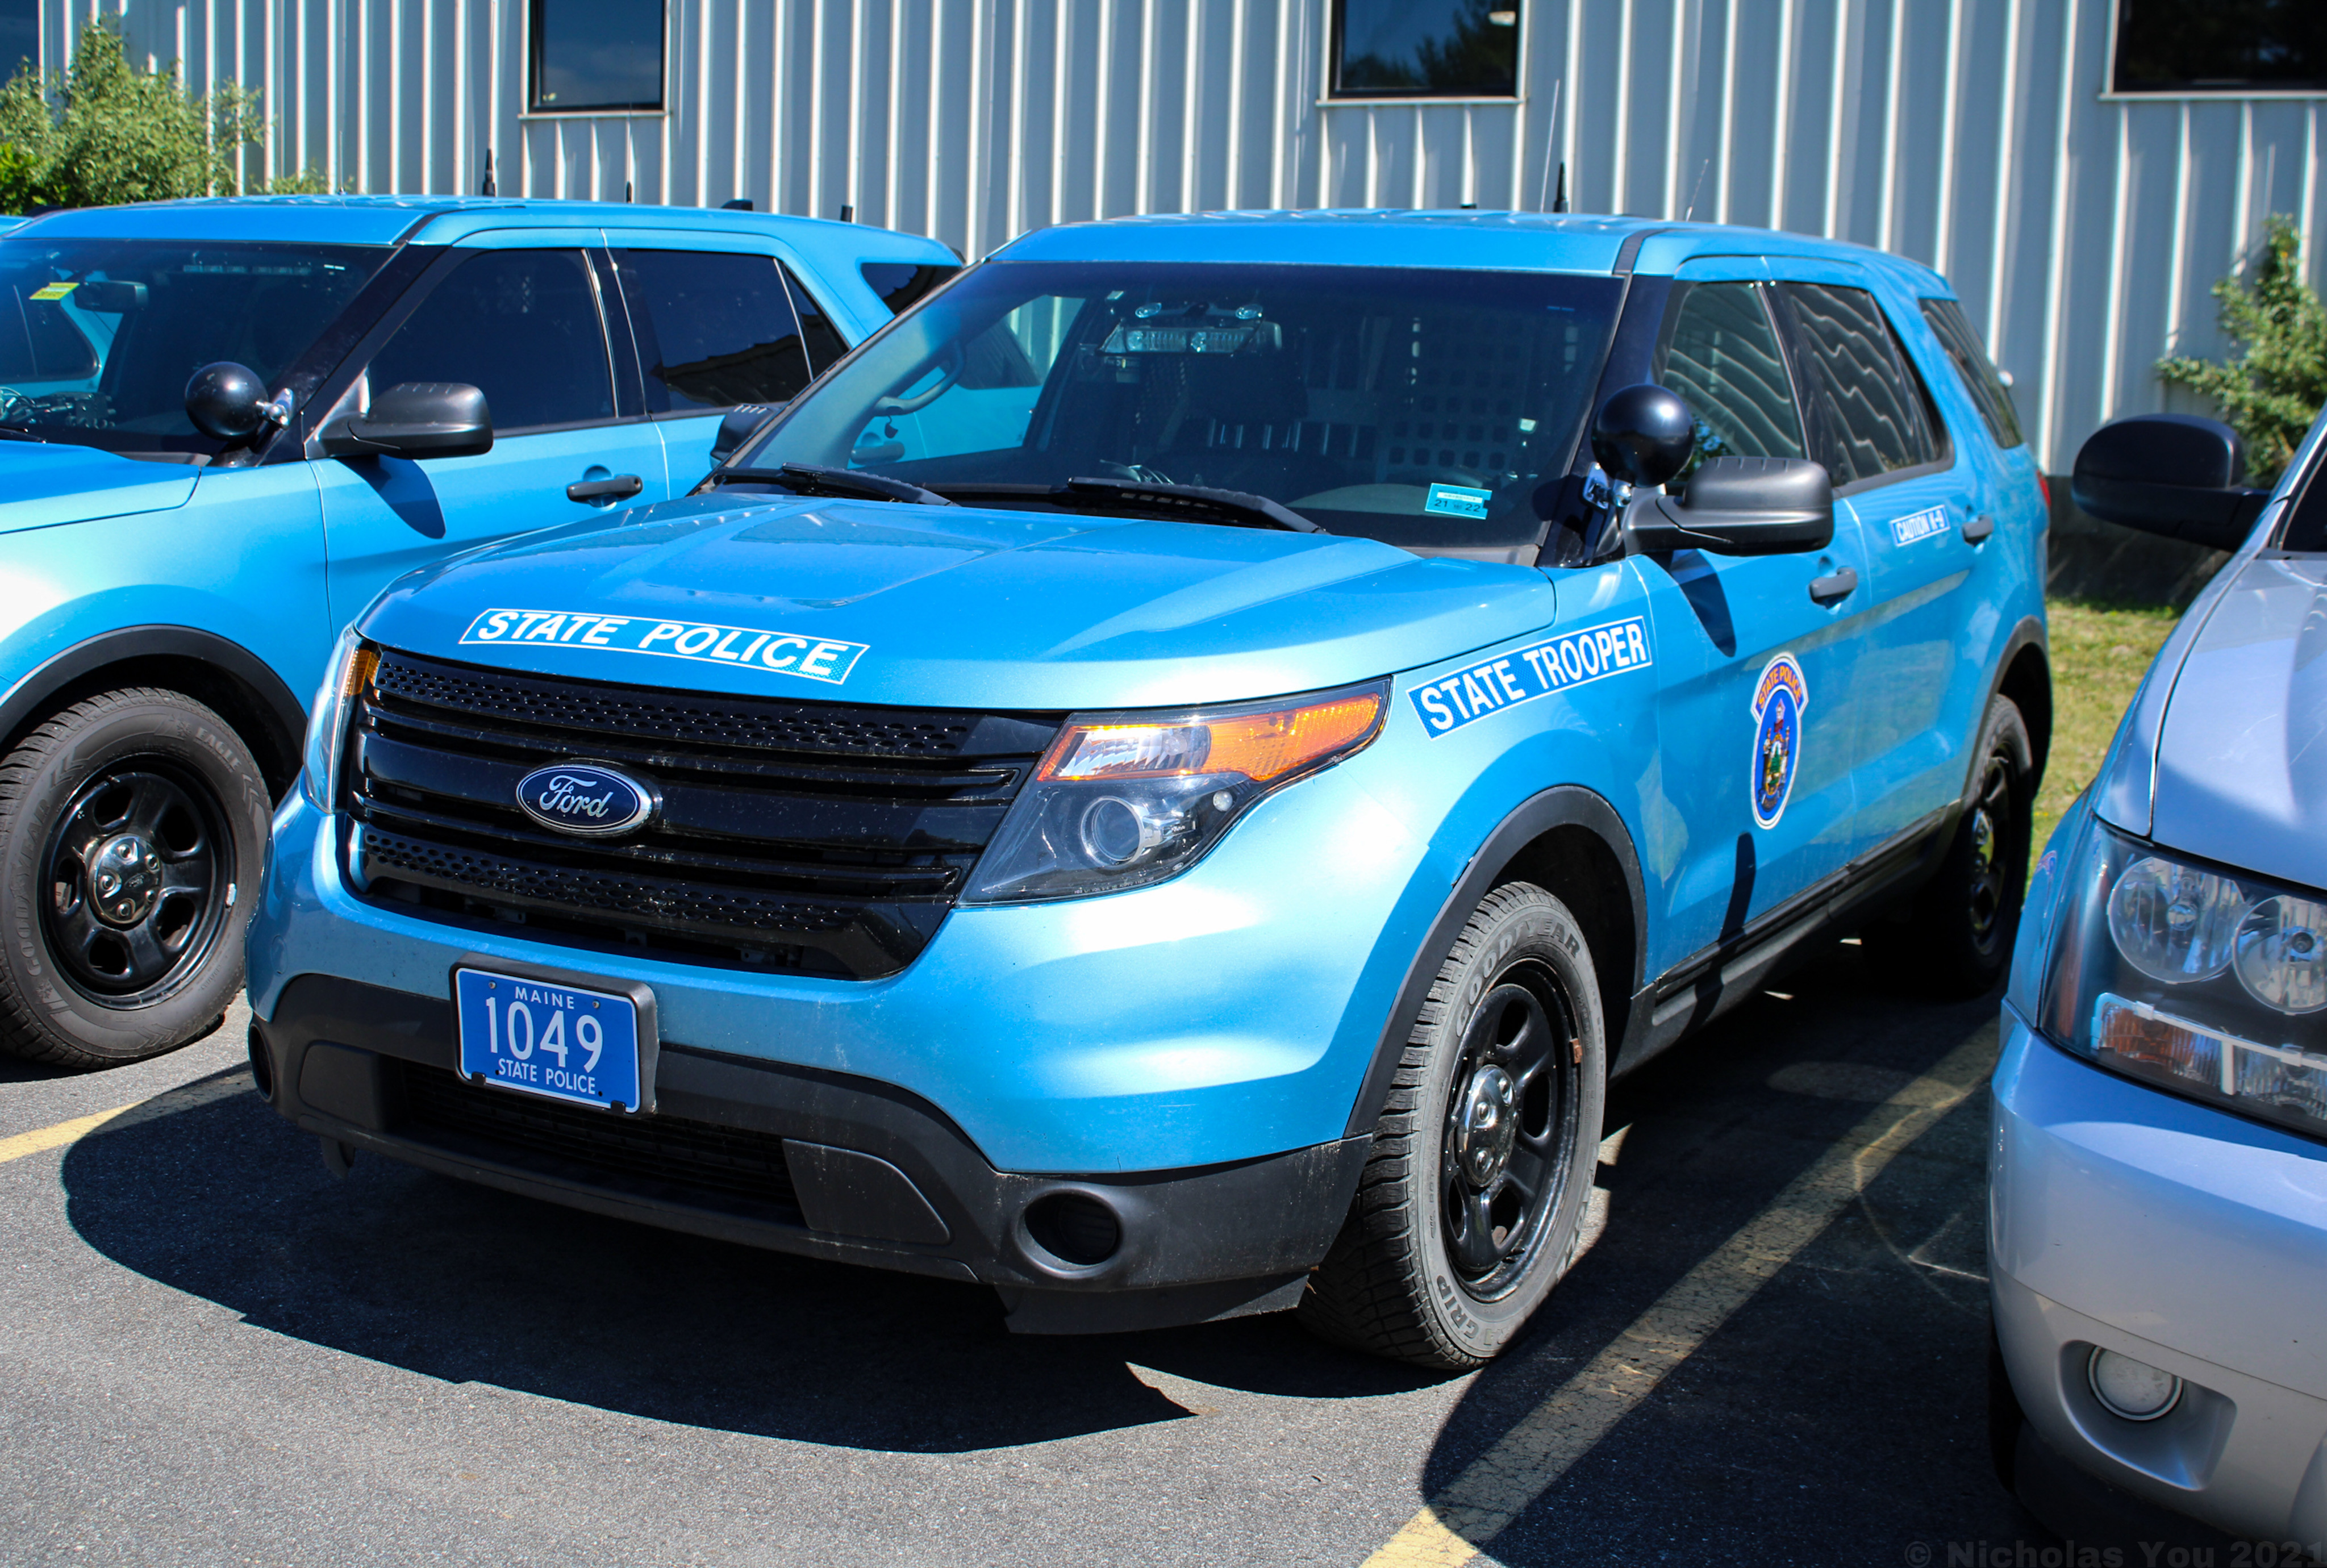 A photo  of Maine State Police
            Cruiser 1049, a 2013-2015 Ford Police Interceptor Utility             taken by Nicholas You